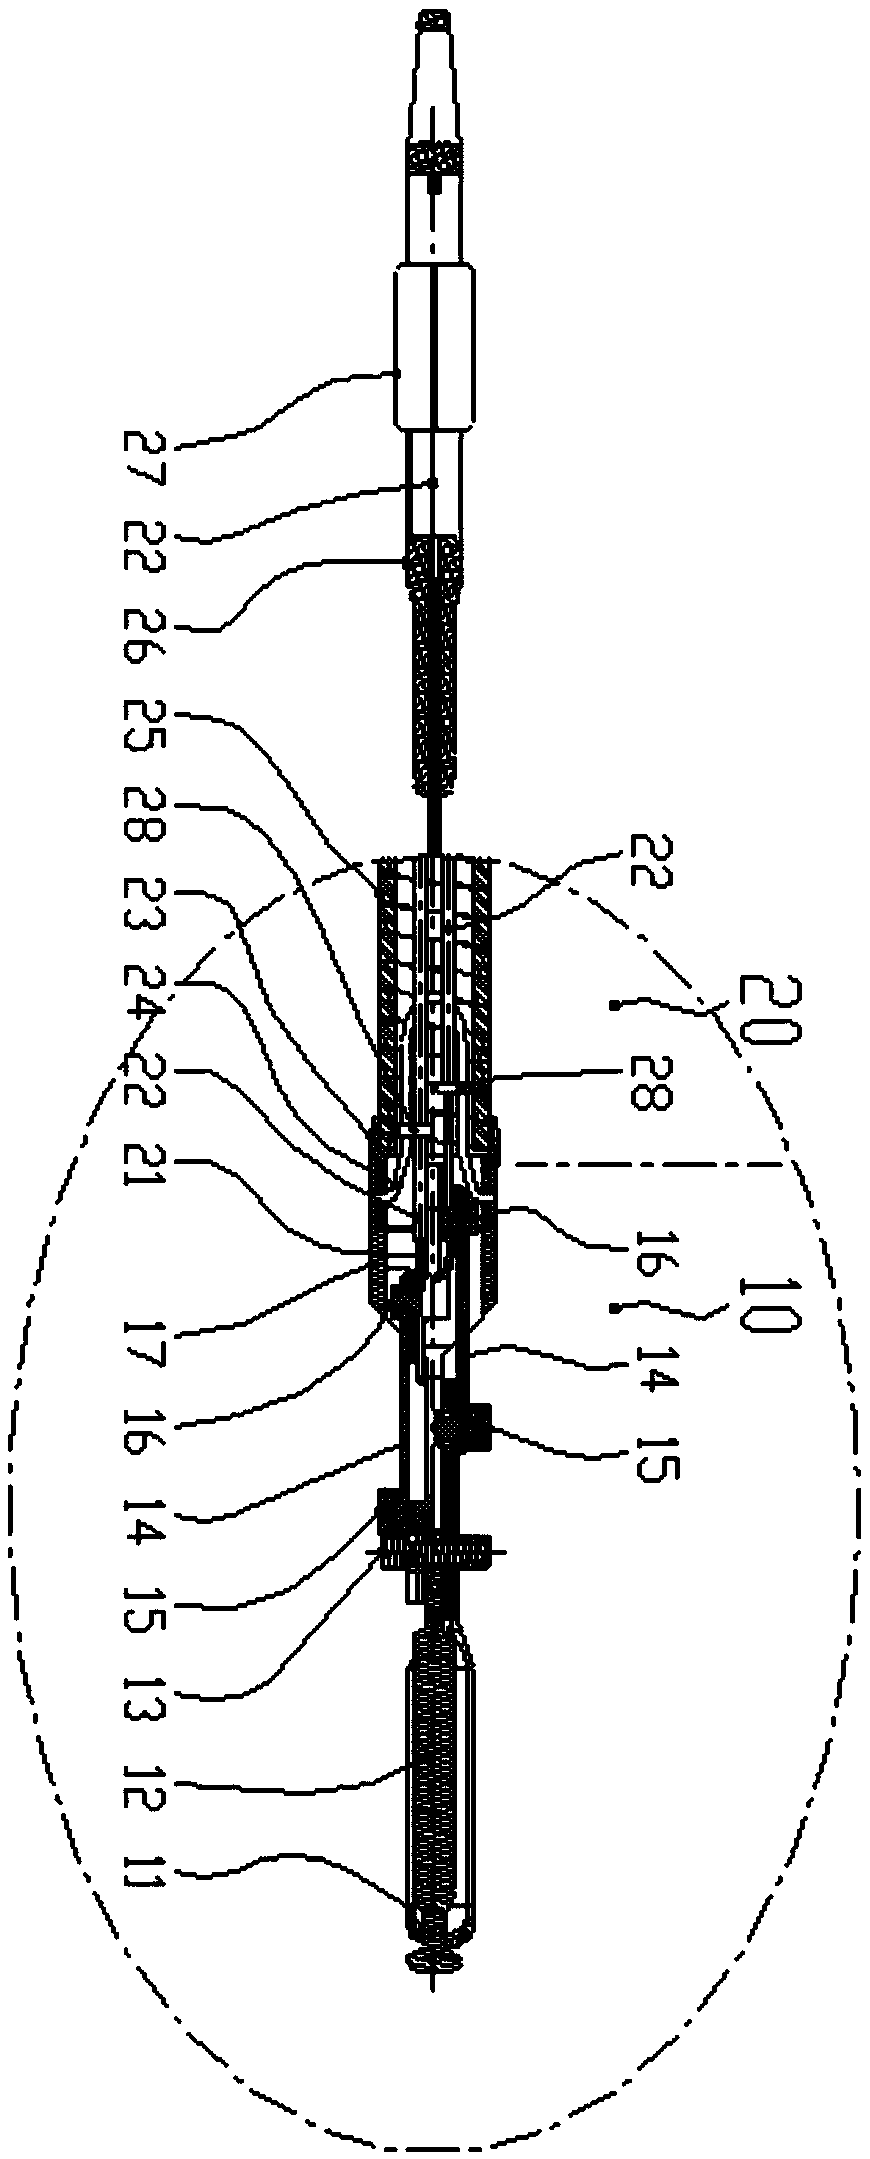 Connection two-sided clamp of digestive endoscopic duct for hemostasis and suturing and operation method